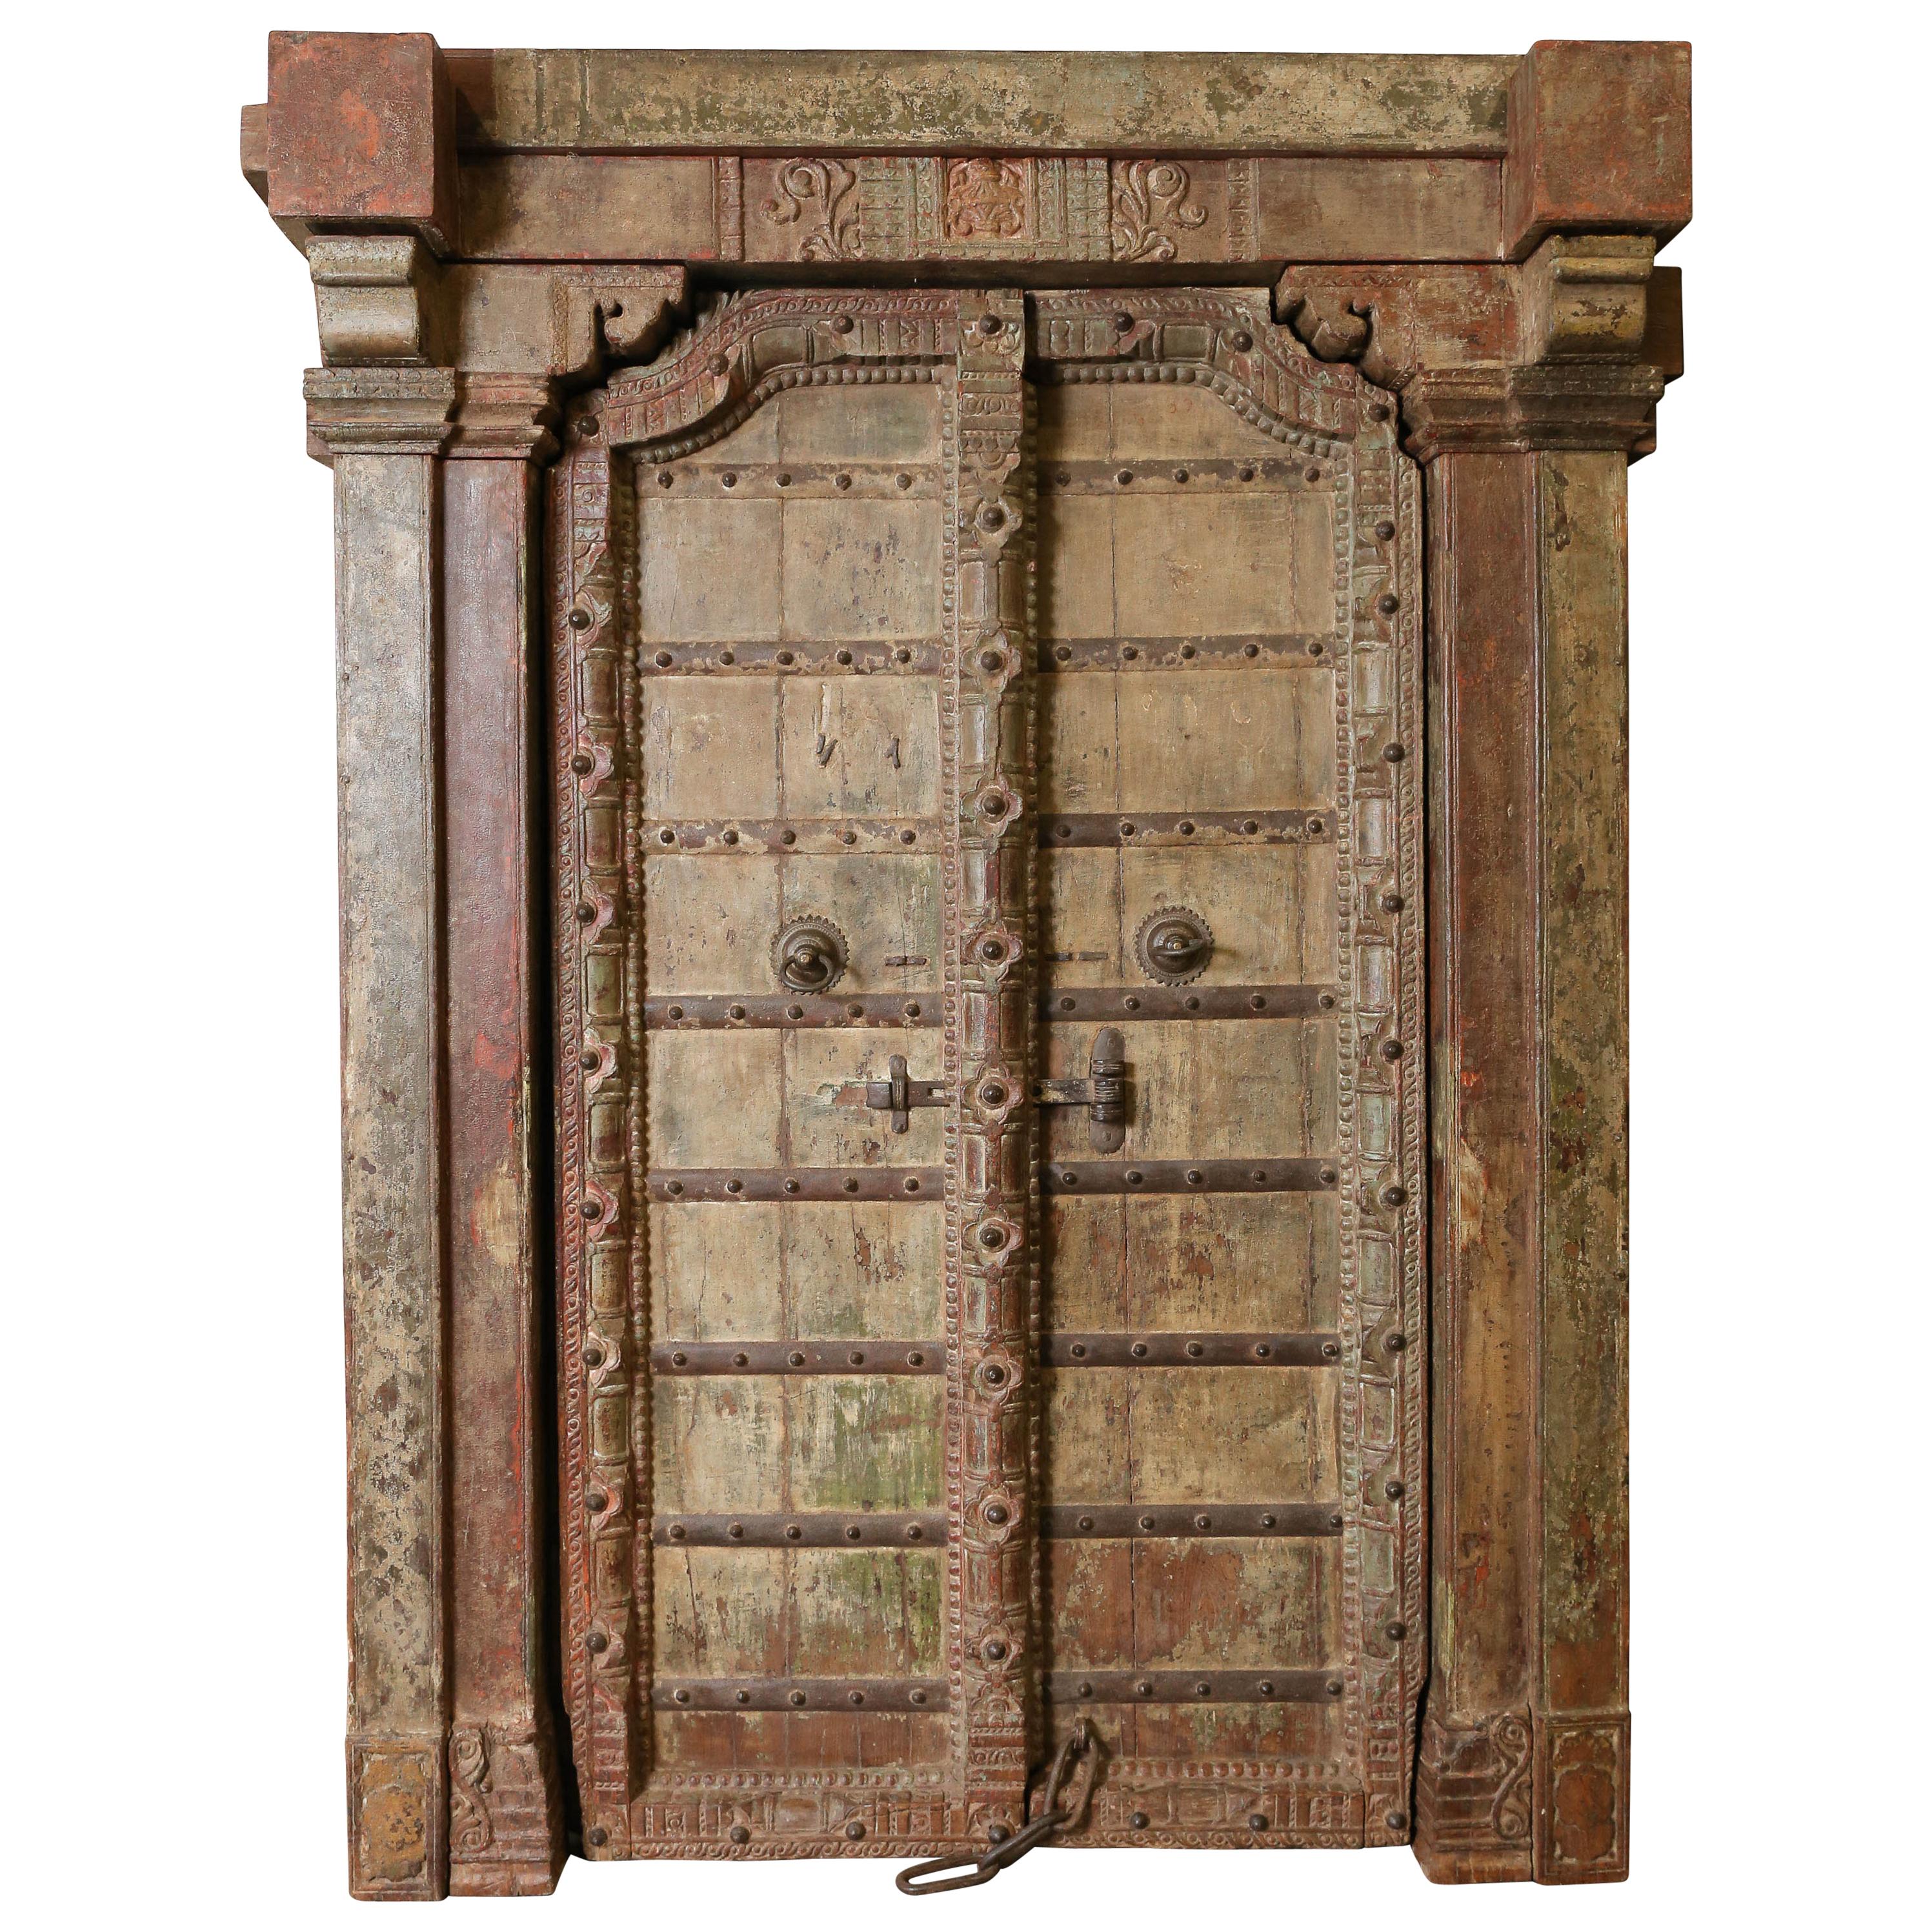 210 Years Old Heavily Fortified Solid Teak Wood Door from a Village Temple